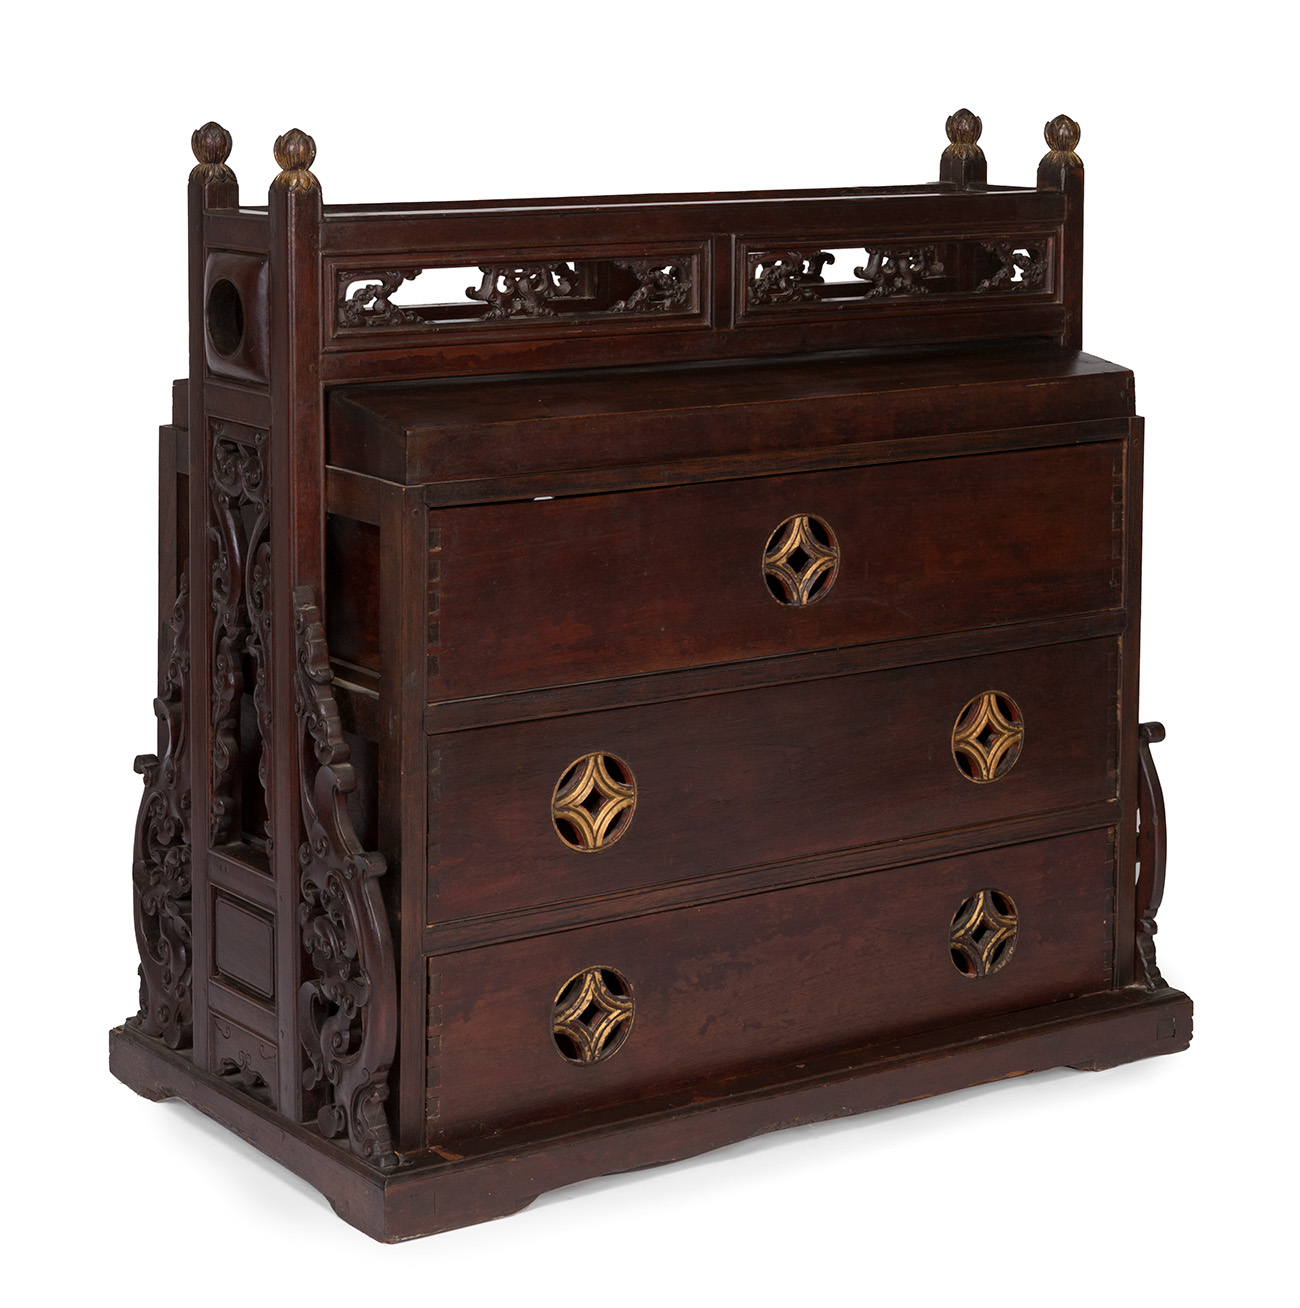 Commode. China, Qing Dynasty, 19th century.Rosewood. Measurements: 96 x 89 x 53 cm.A rare piece of